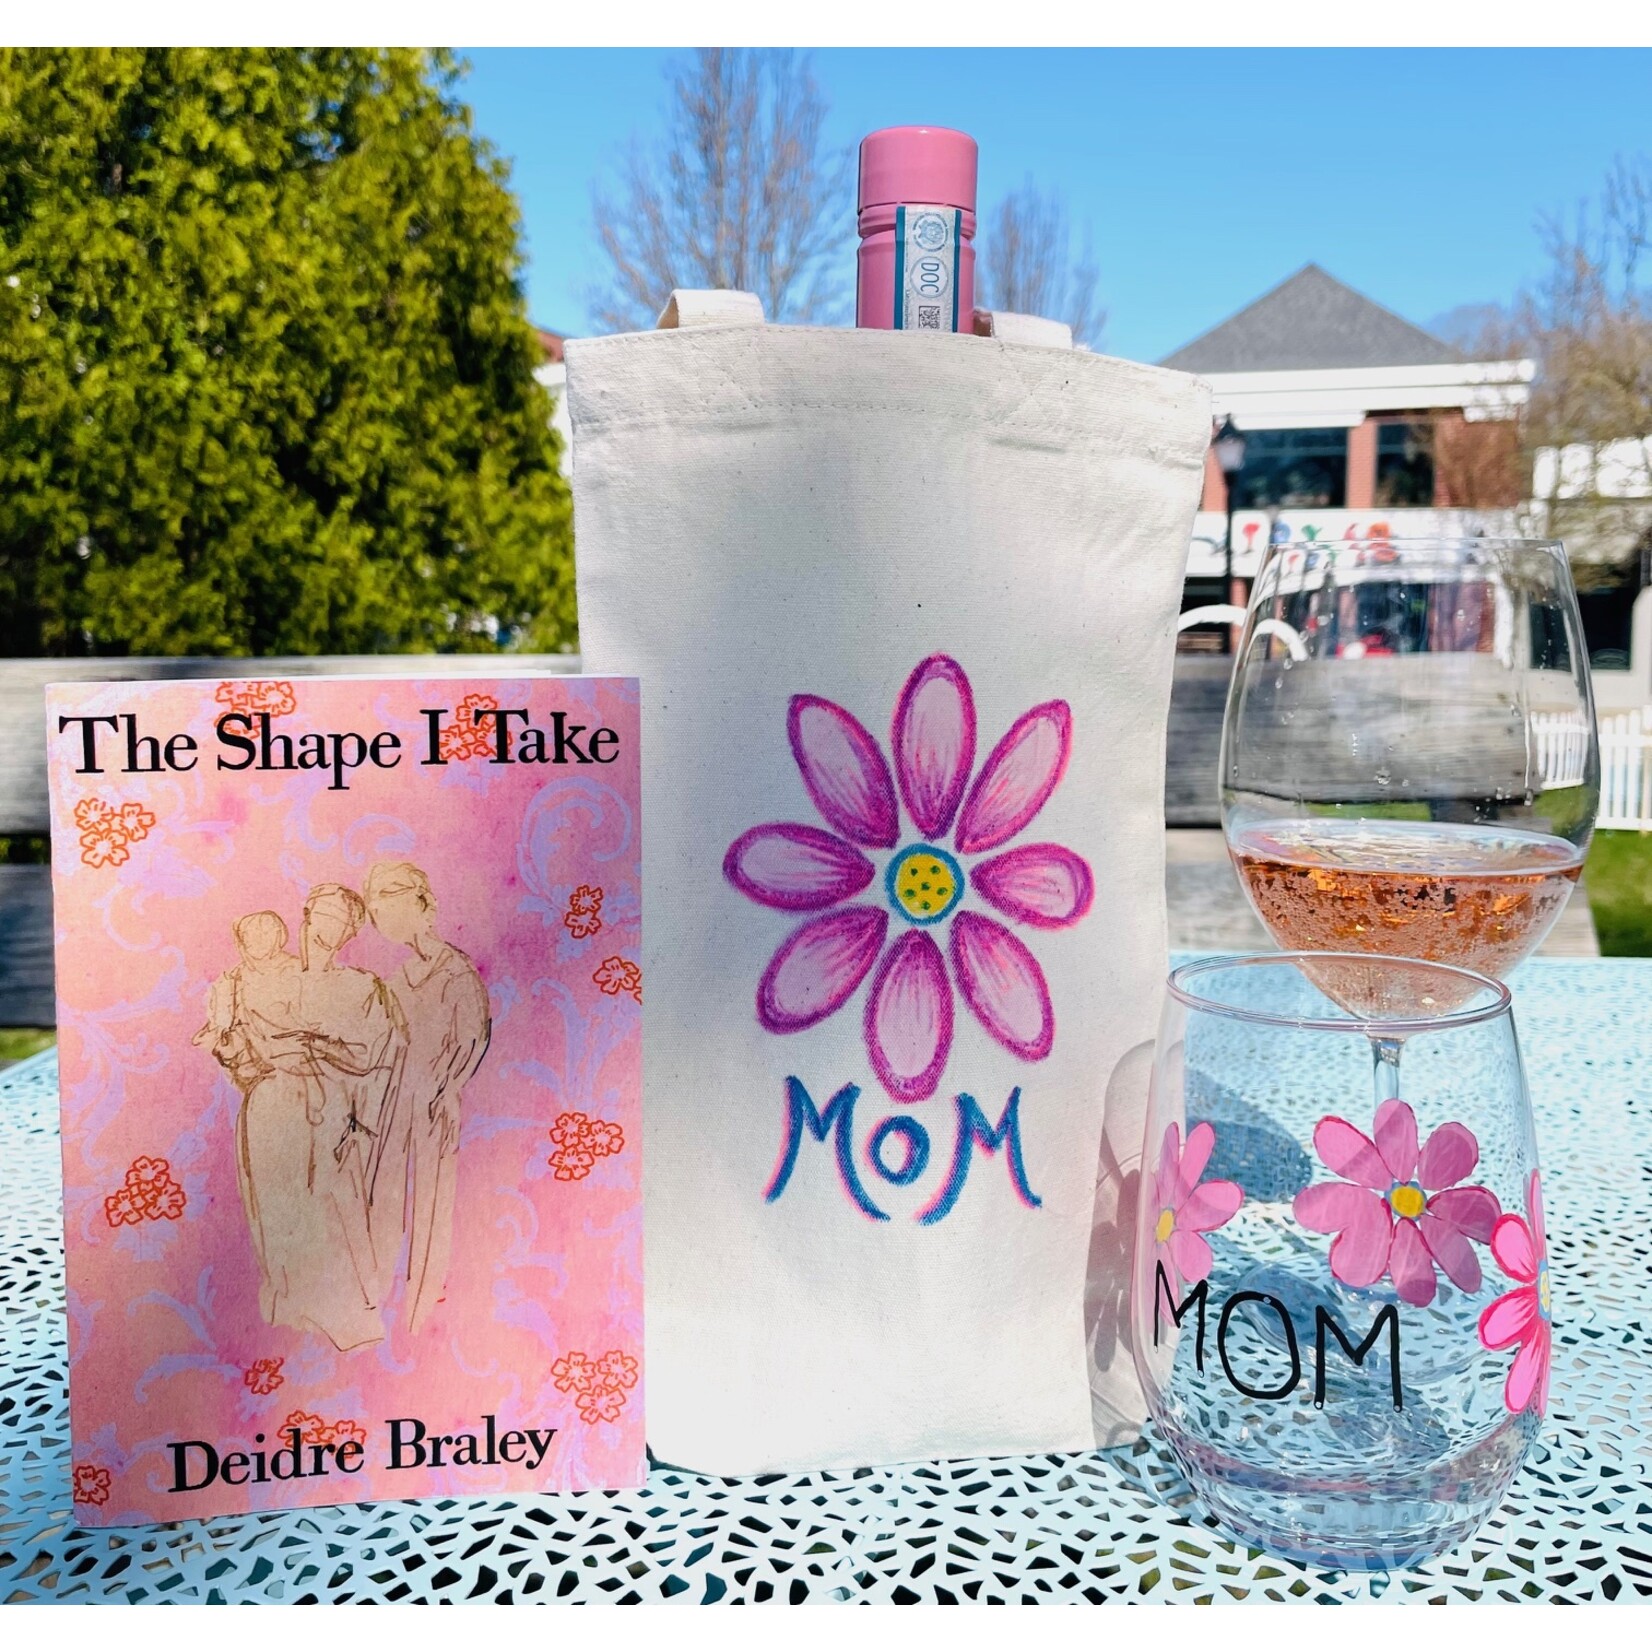 Art, Poetry & Wine: Personalized Gifts for Mom, Tuesday May 7th, 5:30-7:30